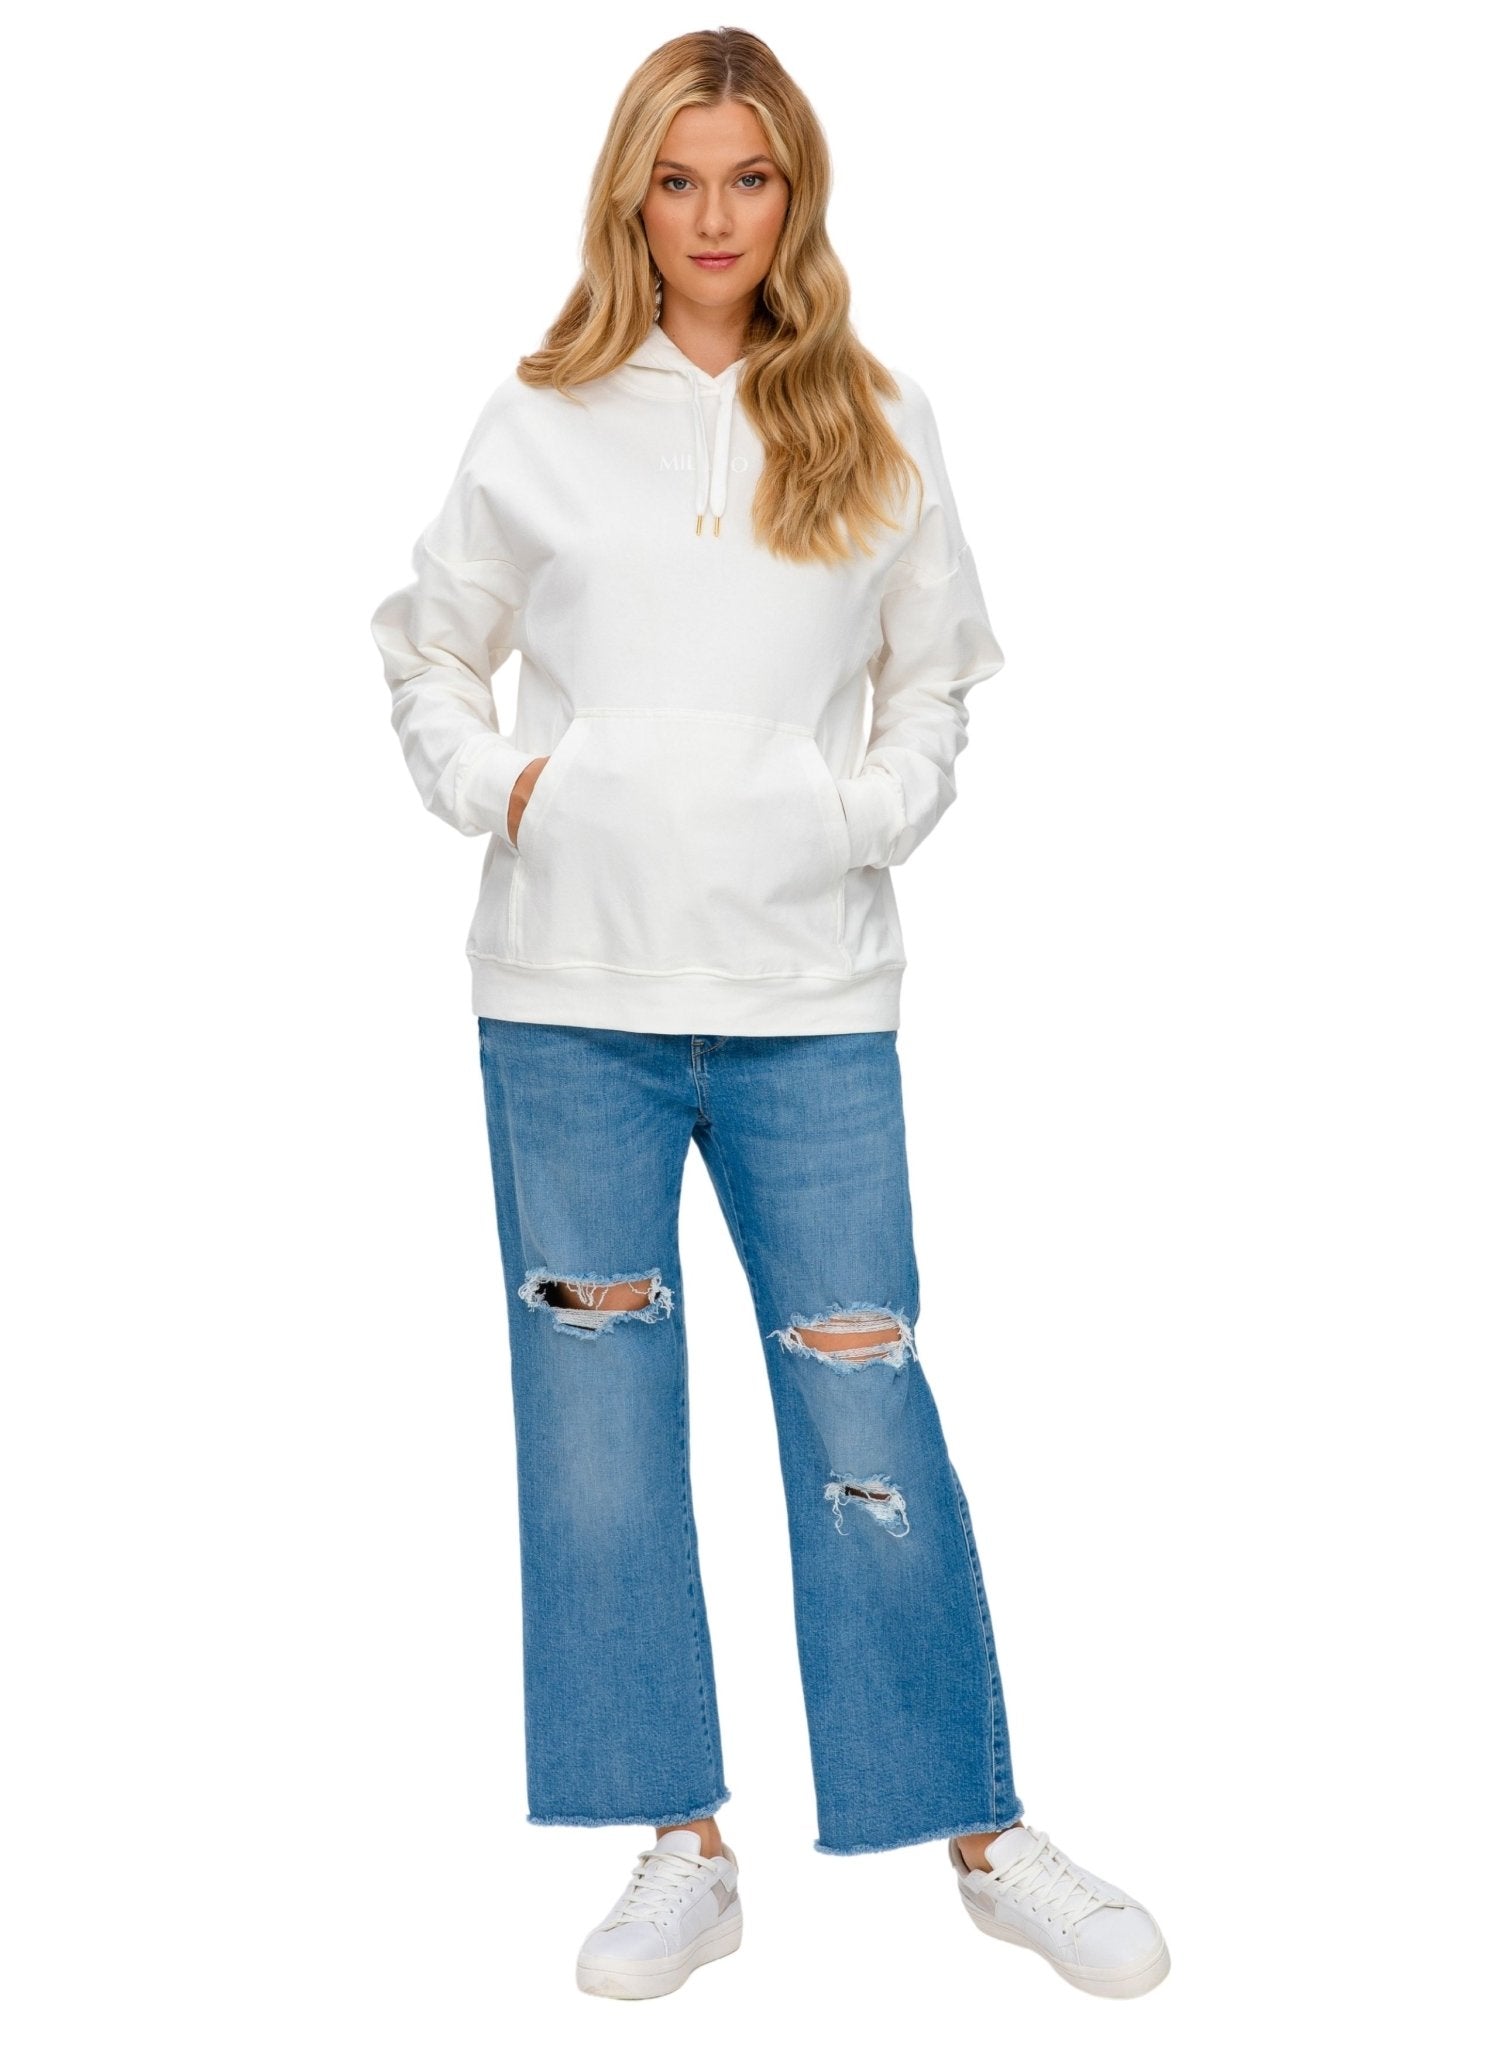 Easy Straight Wide Leg Maternity Jeans with Breaks - Mums and Bumps